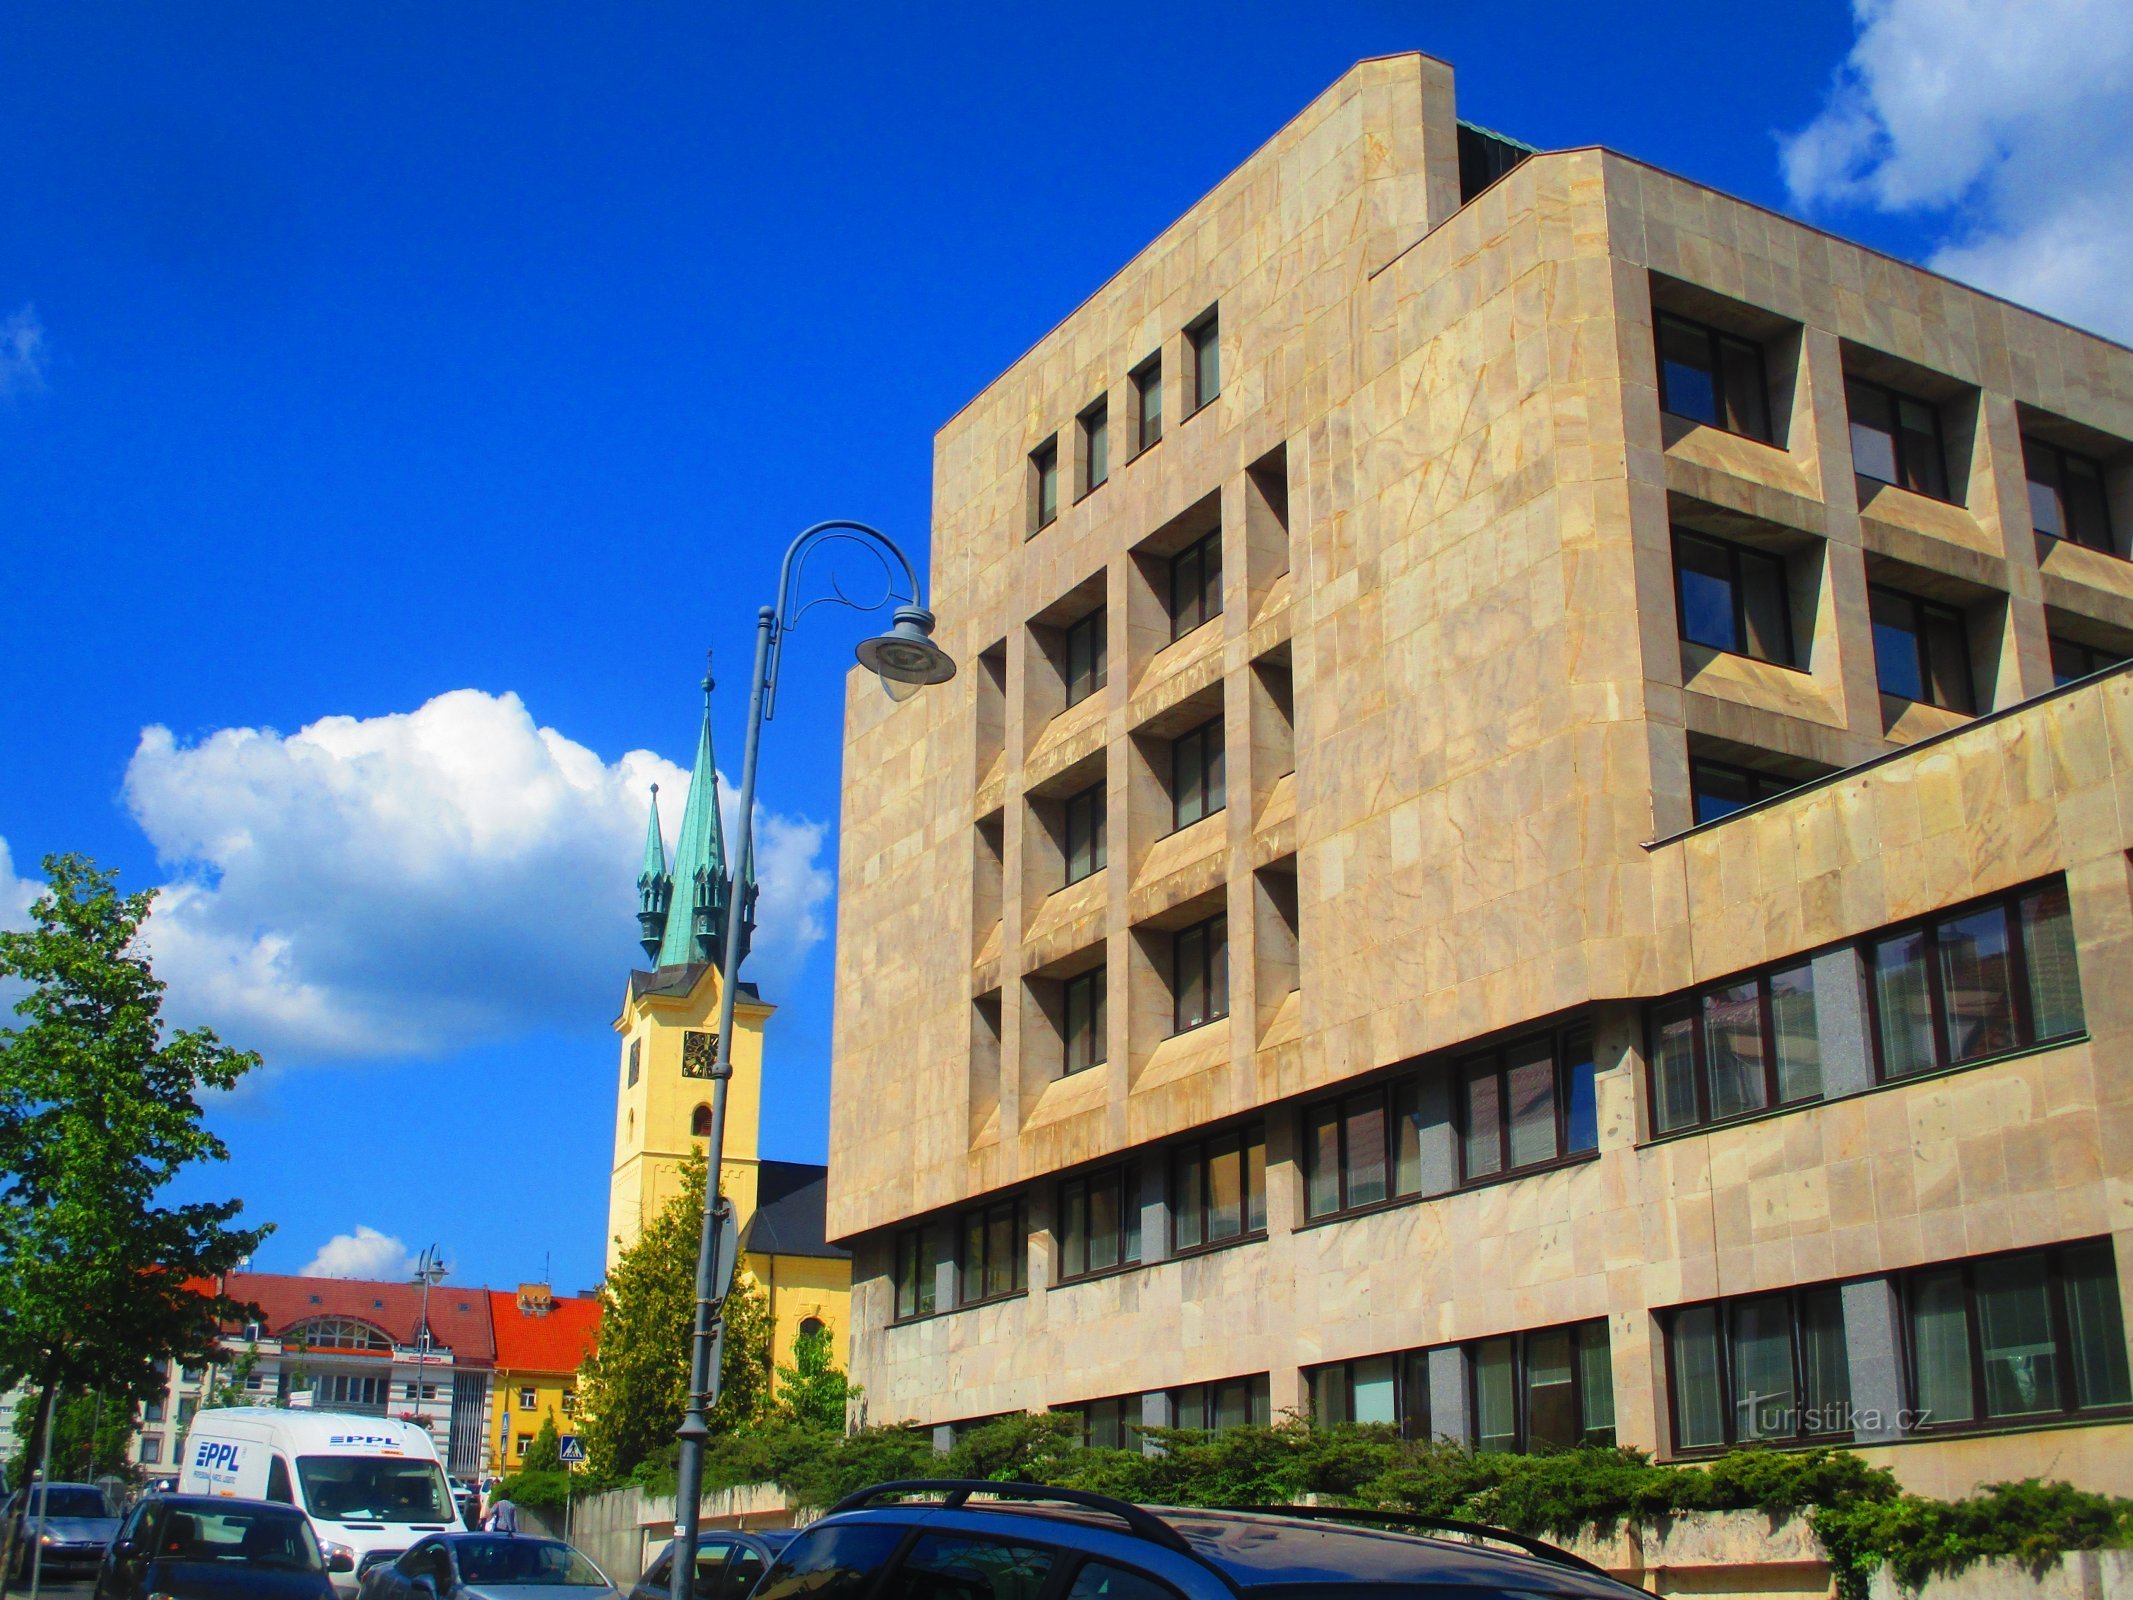 The building of the labor office in Příbram